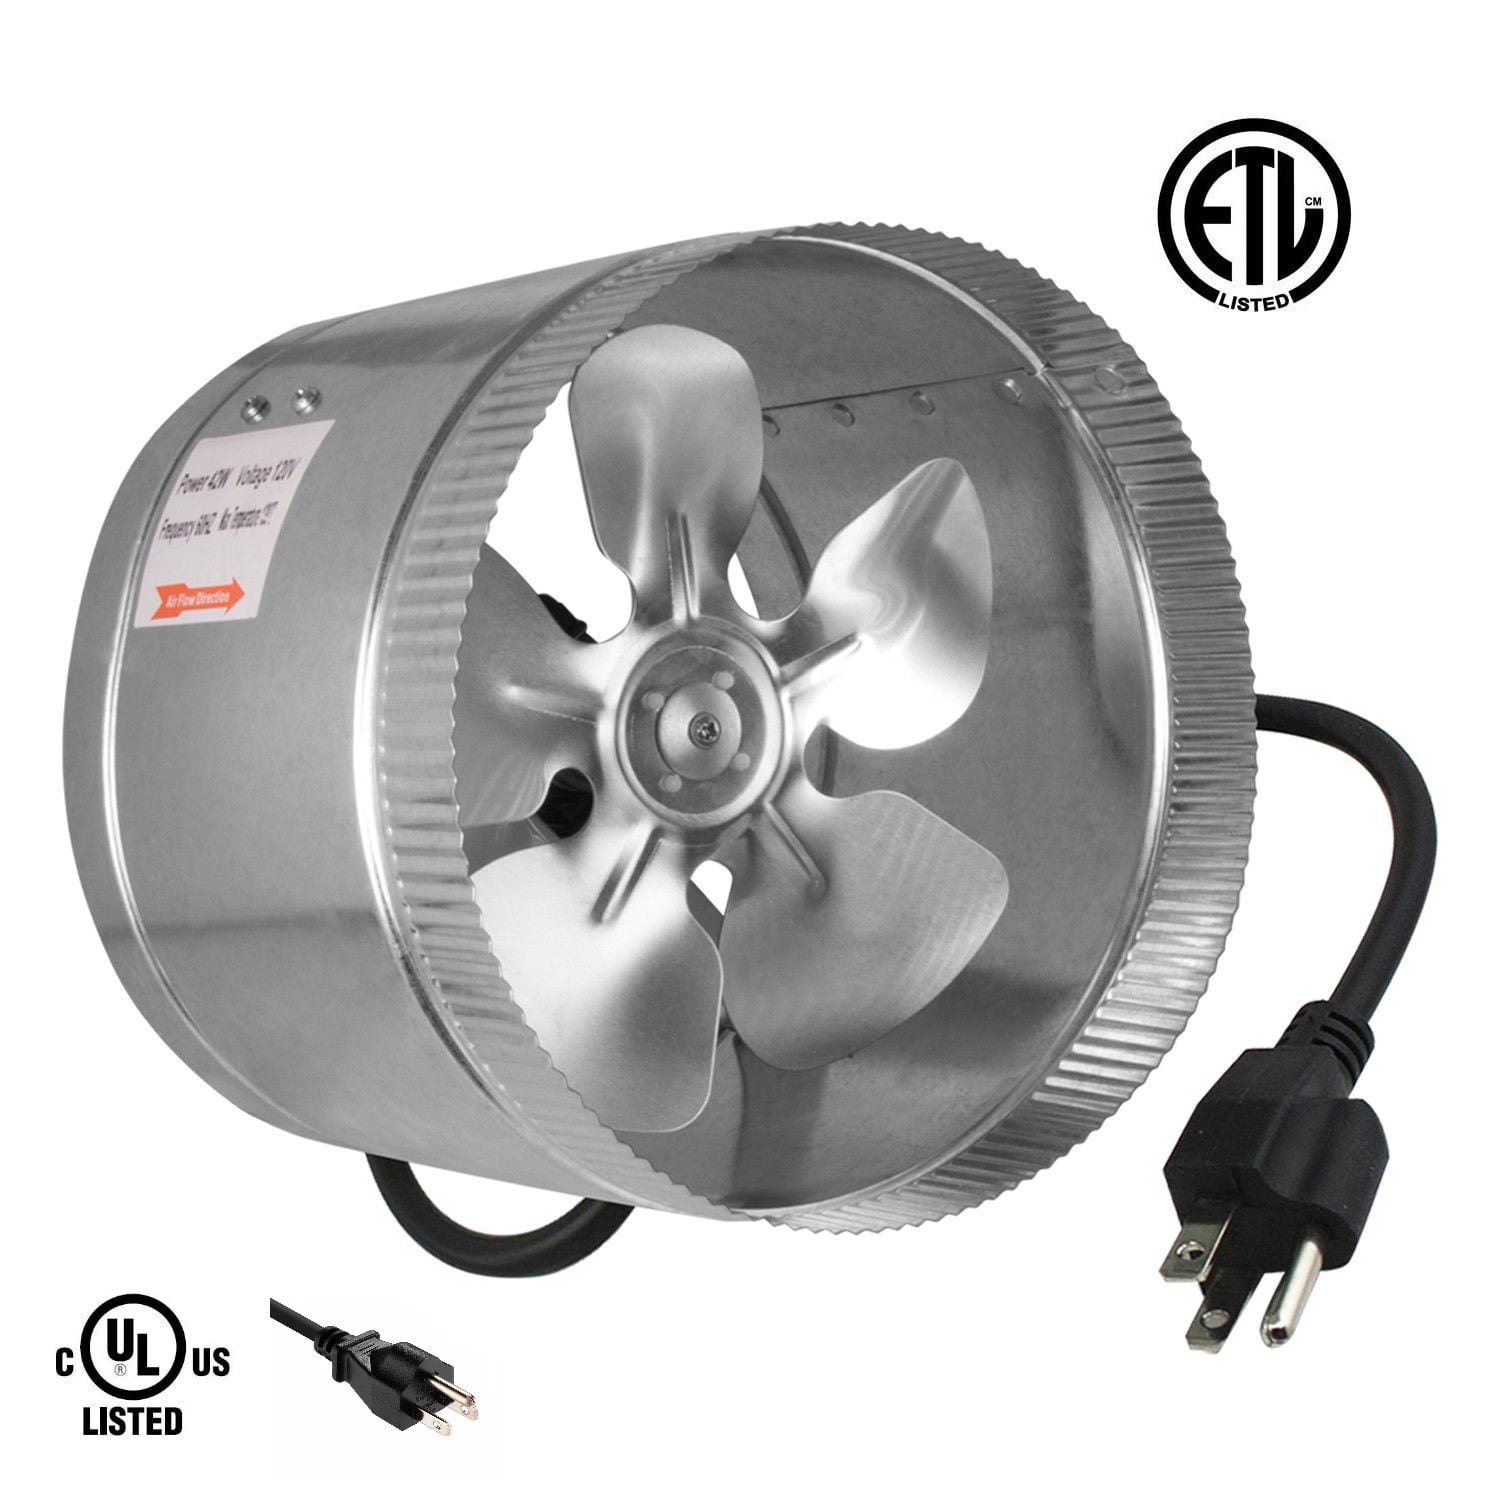 ipower 8 420 cfm booster fan inline duct vent blower for hvac exhaust and intake 5 5 grounded power cord walmart com